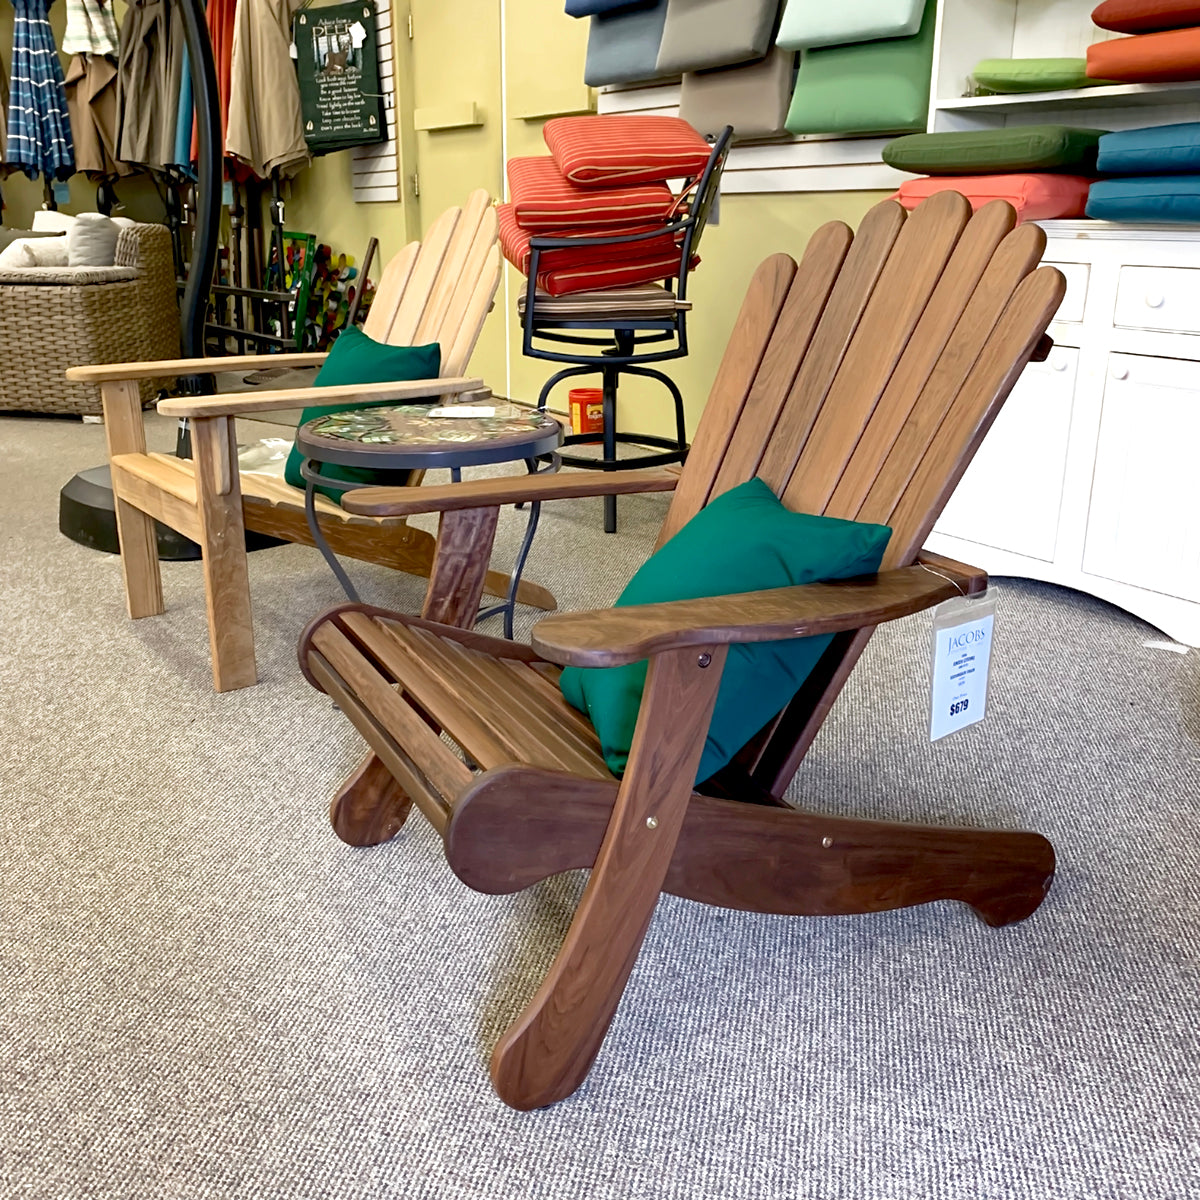 Jensen Leisure Adirondack Chair is available in our Jacobs Custom Living Spokane Valley showroom.